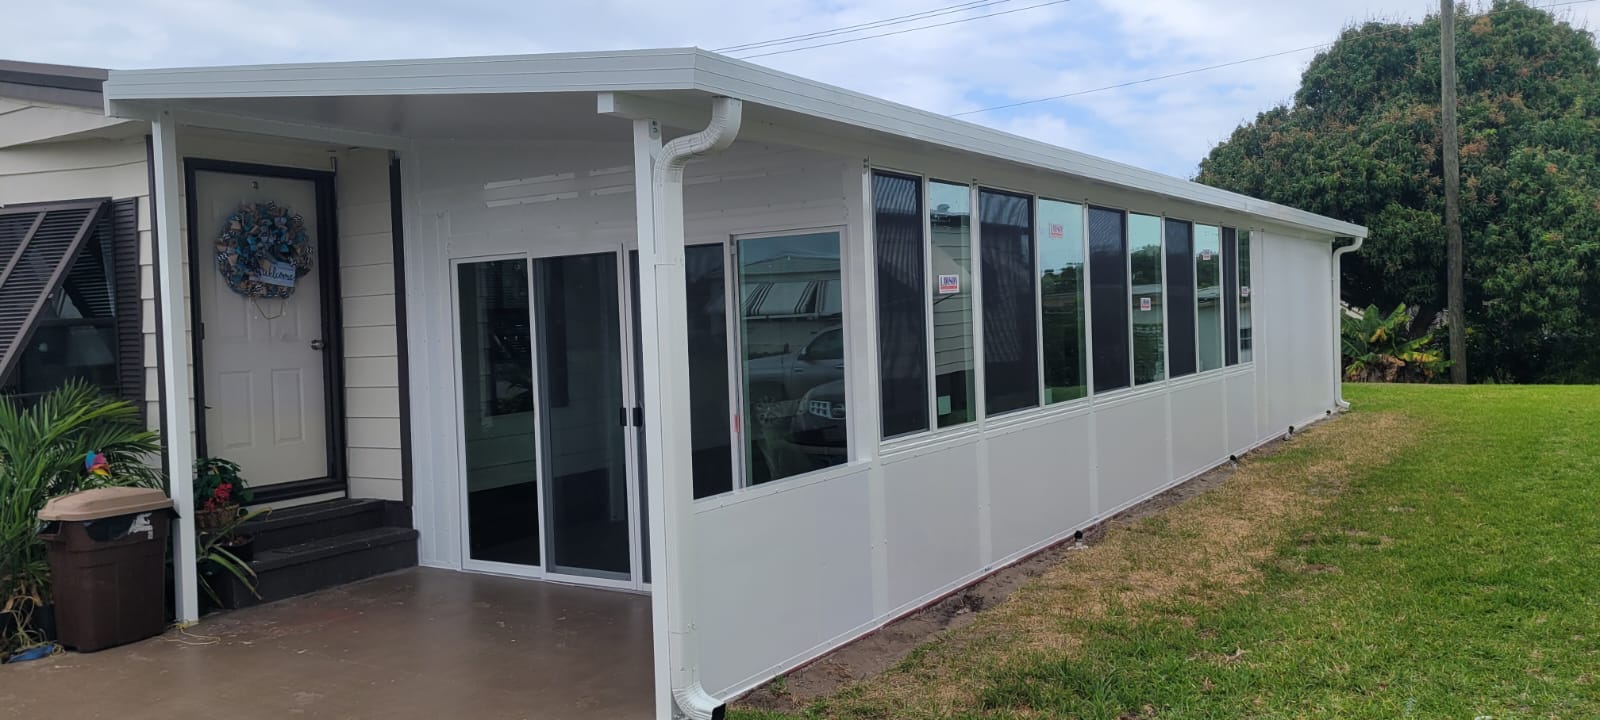 Sunroom attached to side of Mobile home